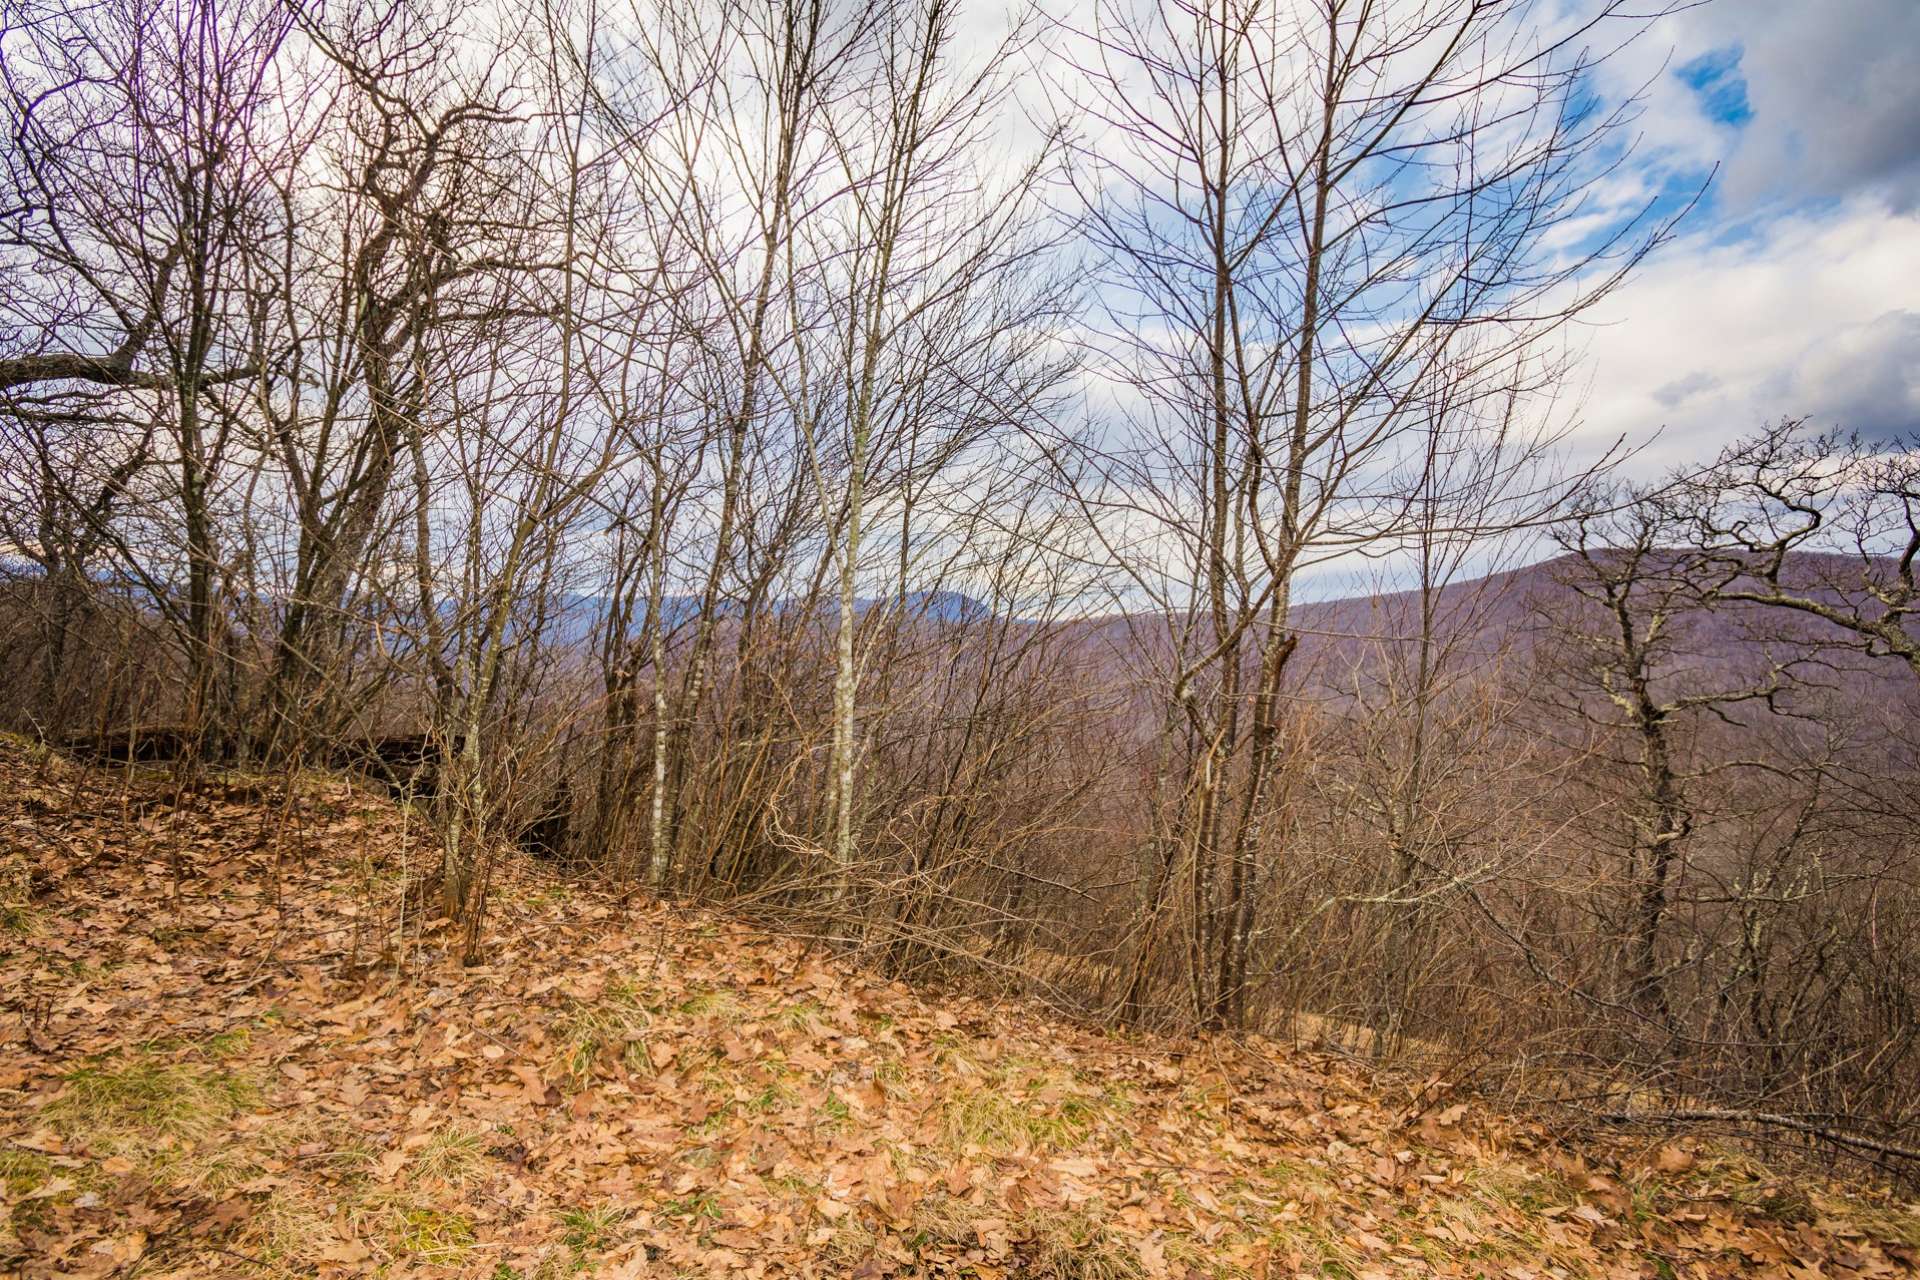 Make plans today to come visit this gorgeous 2 acre homesite in Big Tree, a well established mountain community located just minutes to downtown West Jefferson and just a short drive into Boone, Blowing Rock, and other NC High Country destinations.